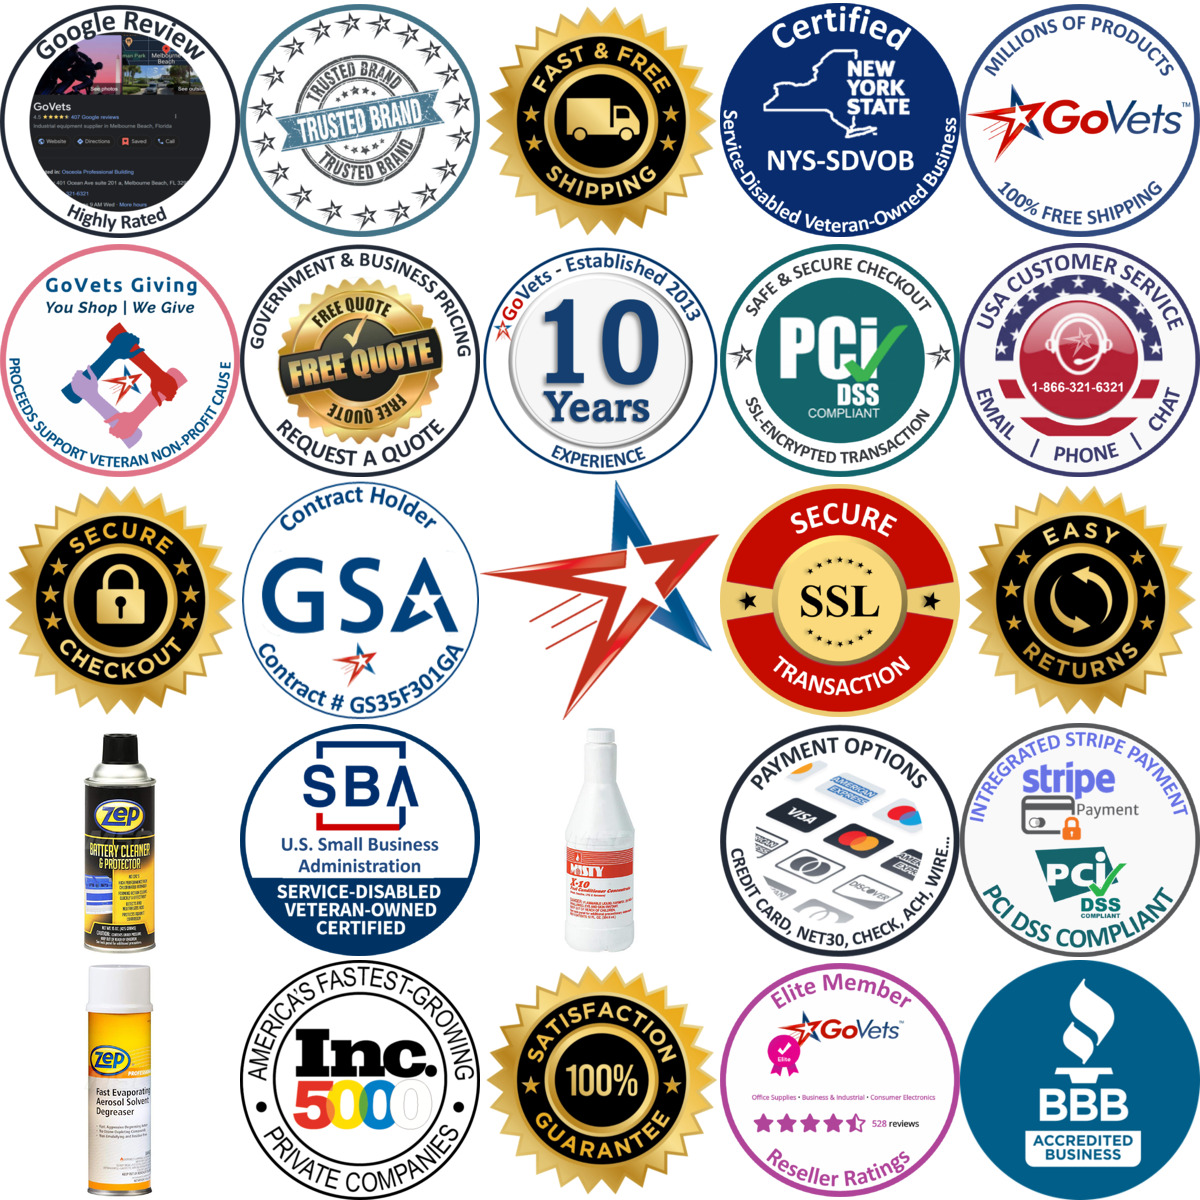 A selection of Grease products on GoVets